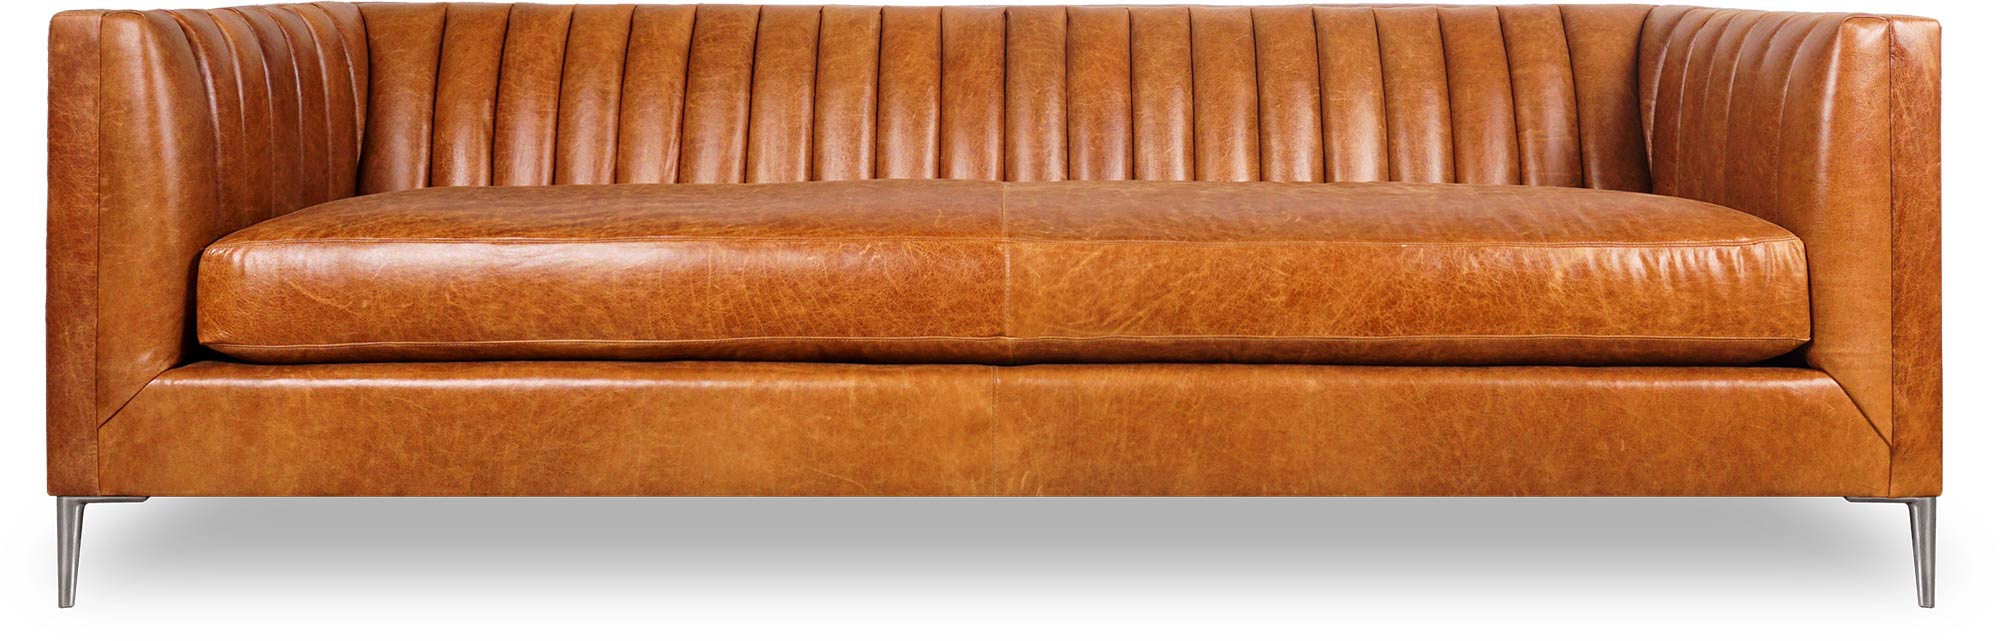 Channel Tufted Shelter Sofas, Mid Century Modern Sleeper Sofa Leather